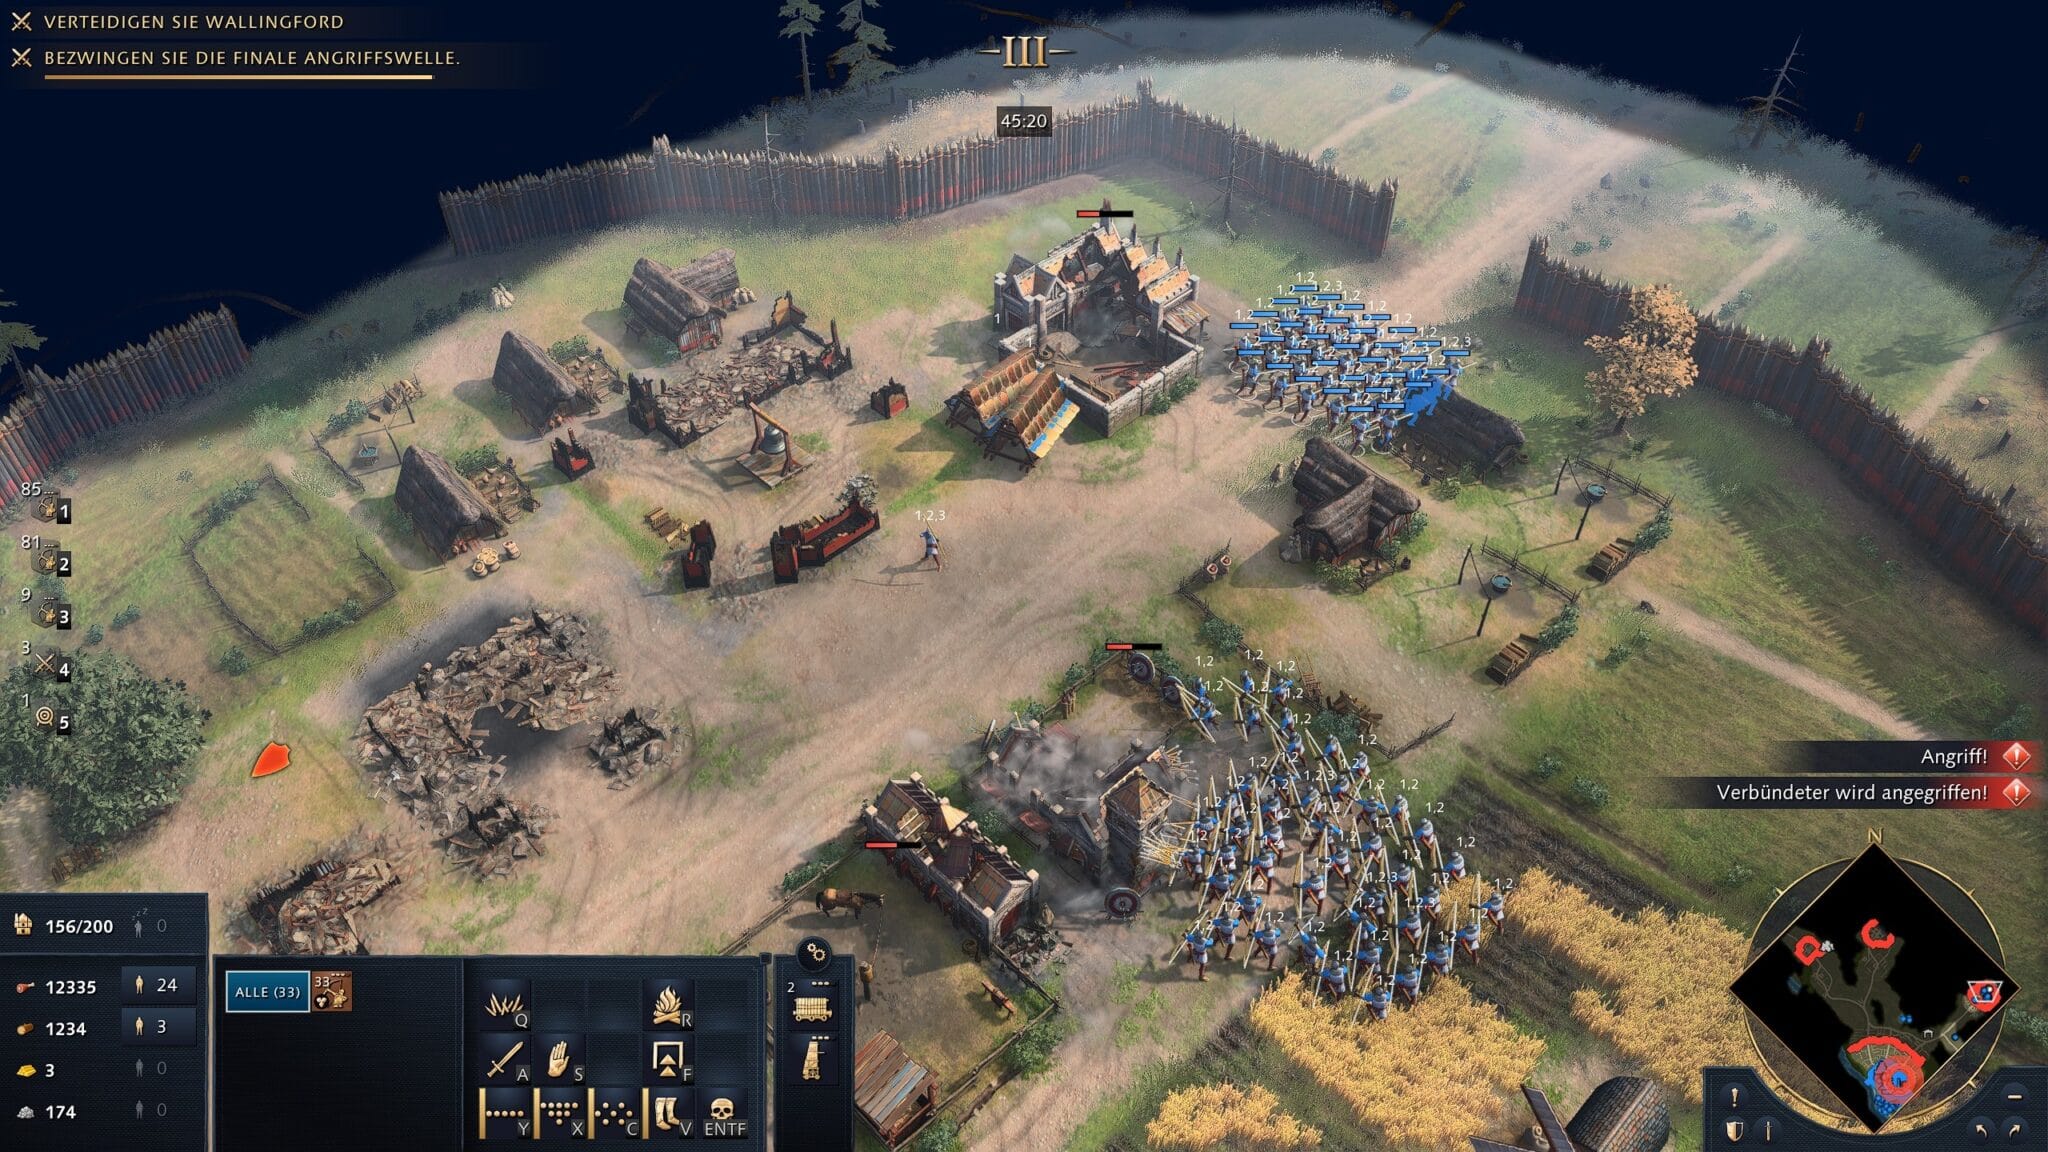 For single player players, Age of Empires 4 basically only offers the campaign. Here we took out the enemy's extremely heavily defended camps, although we were actually only supposed to defend the city.